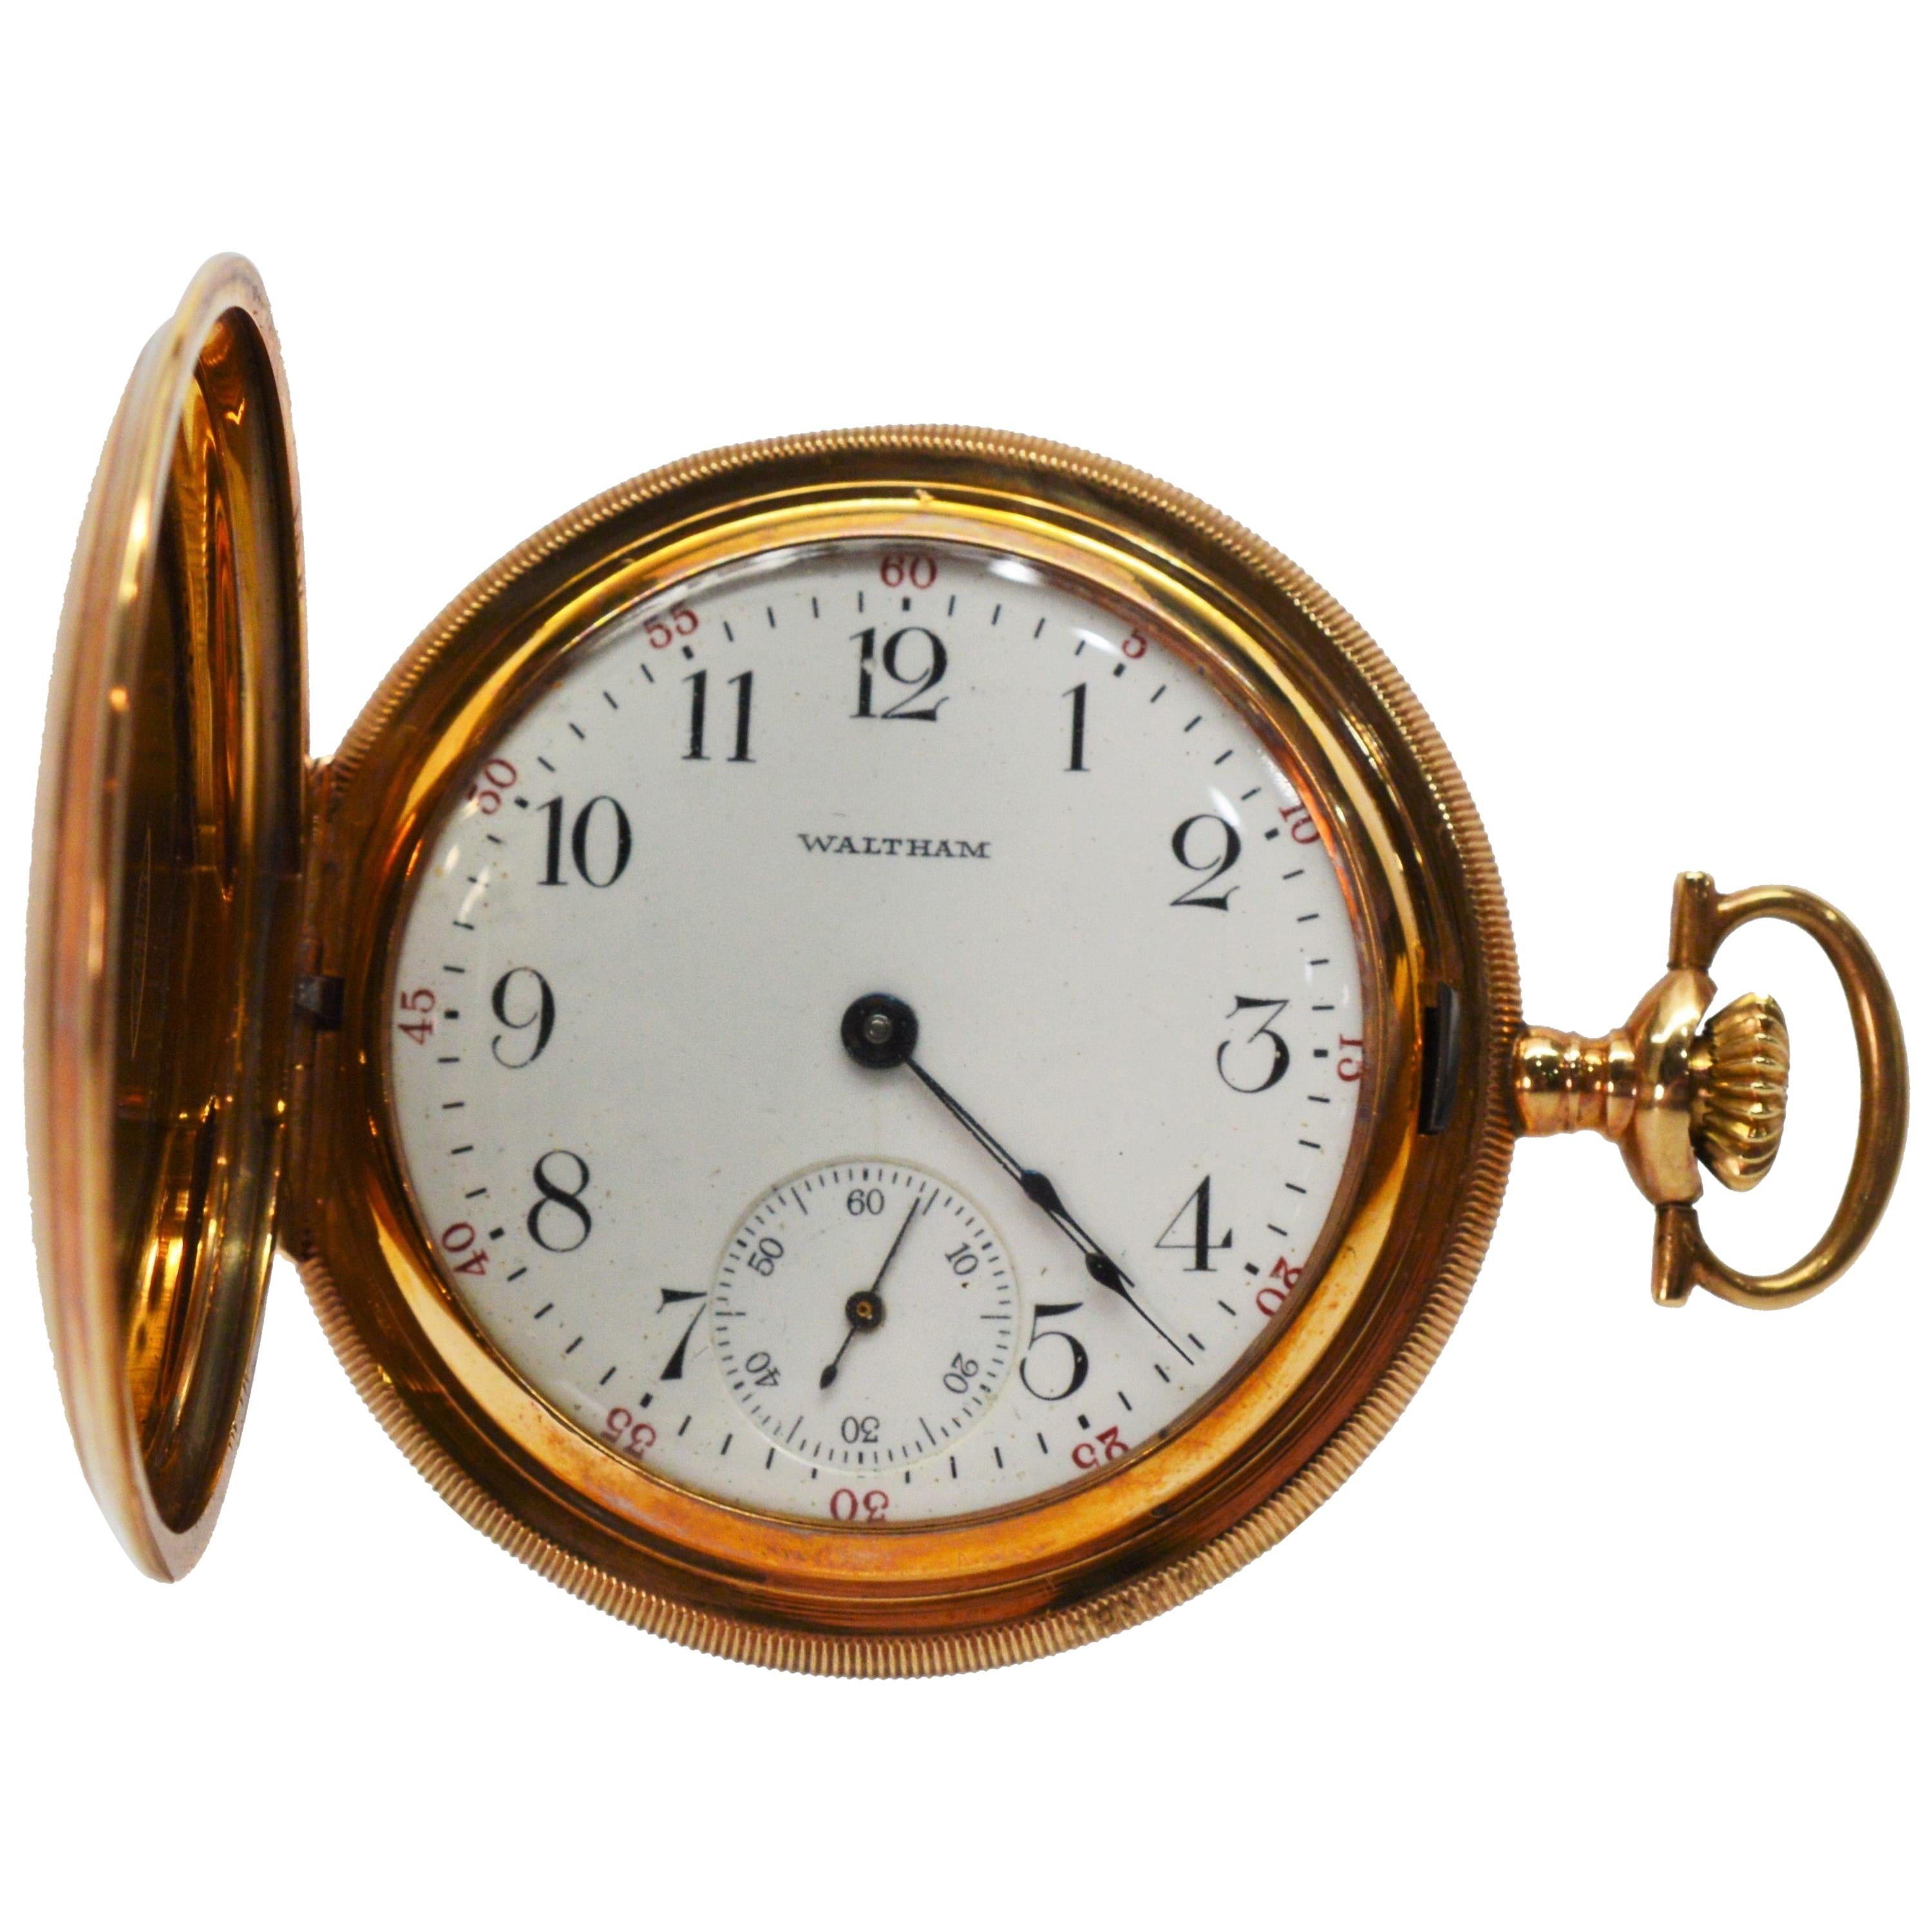 American Waltham Co. Antique Yellow Gold Pocket Watch